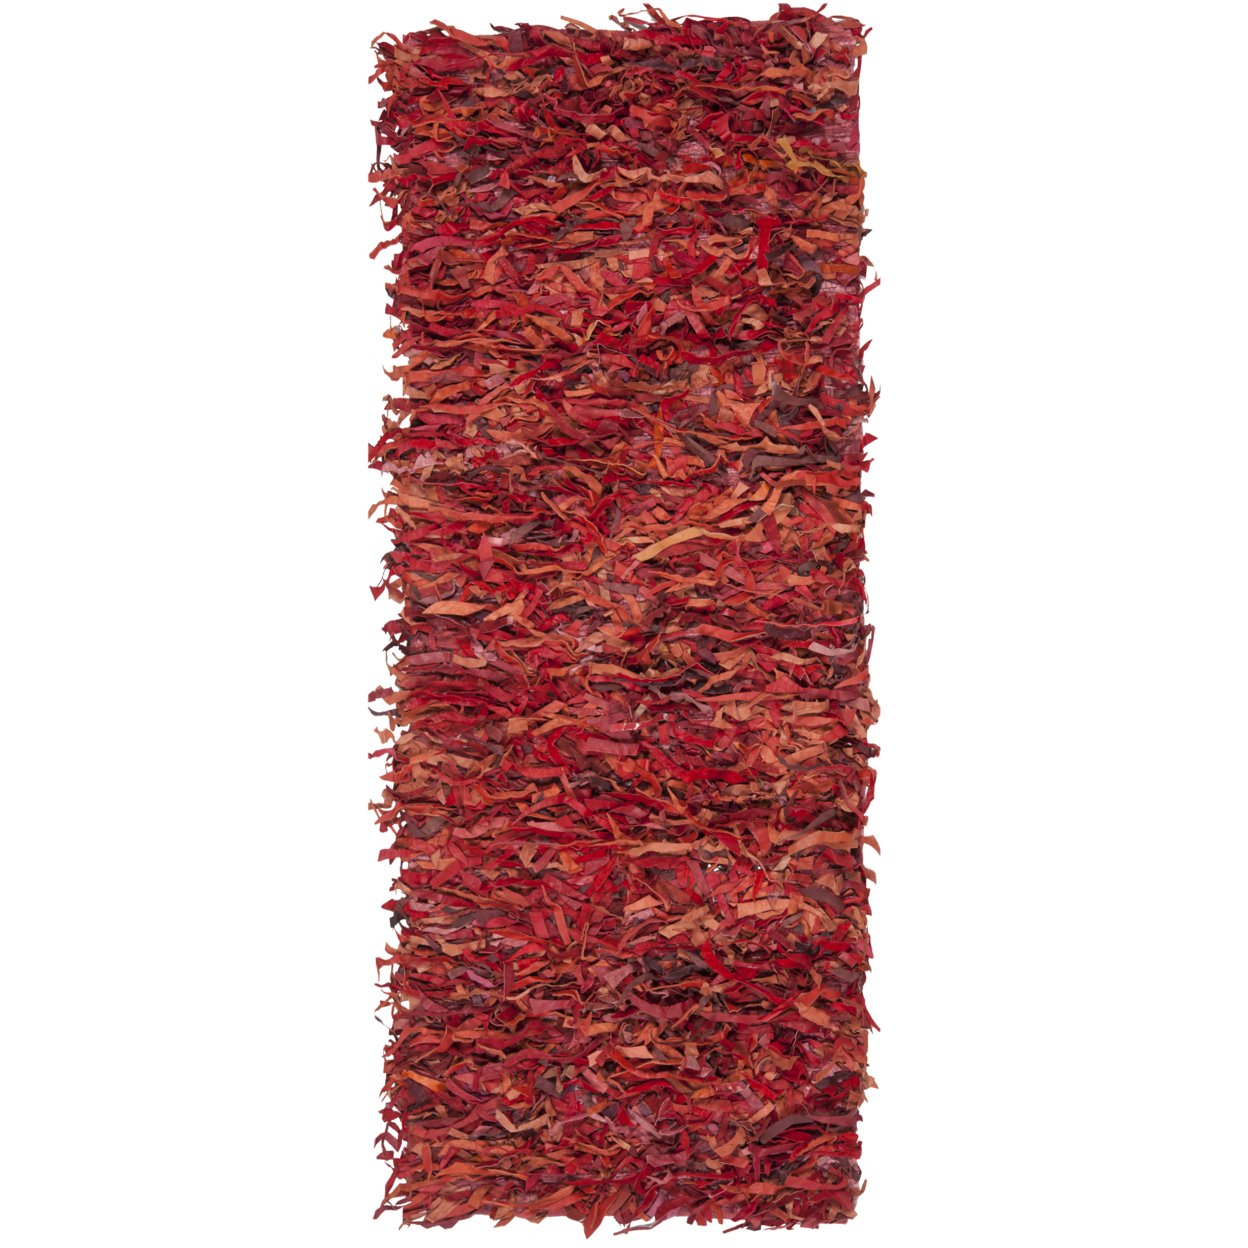 SAFAVIEH Leather Shag LSG511D Hand-knotted Red Rug - 2' 3 X 6'